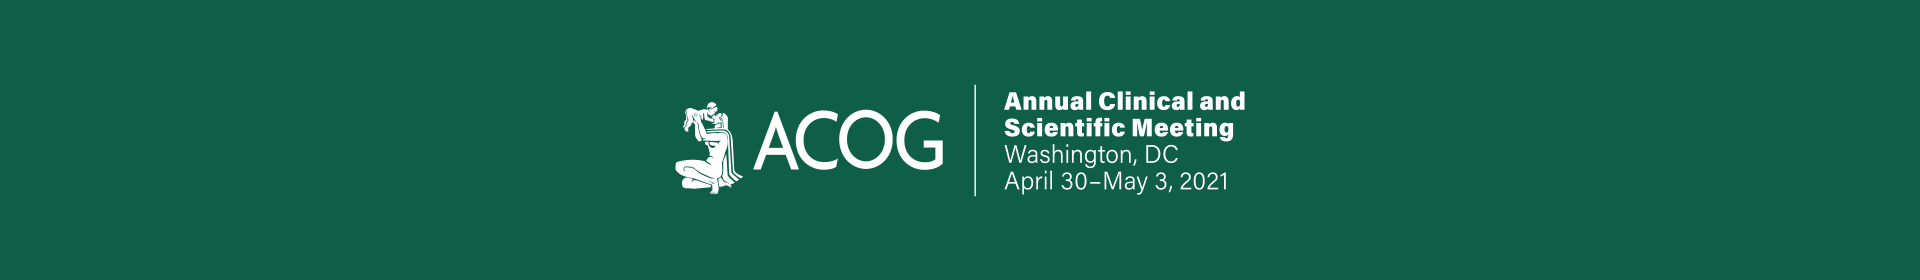 2021 ACOG Annual Clinical and Scientific Meeting Event Banner